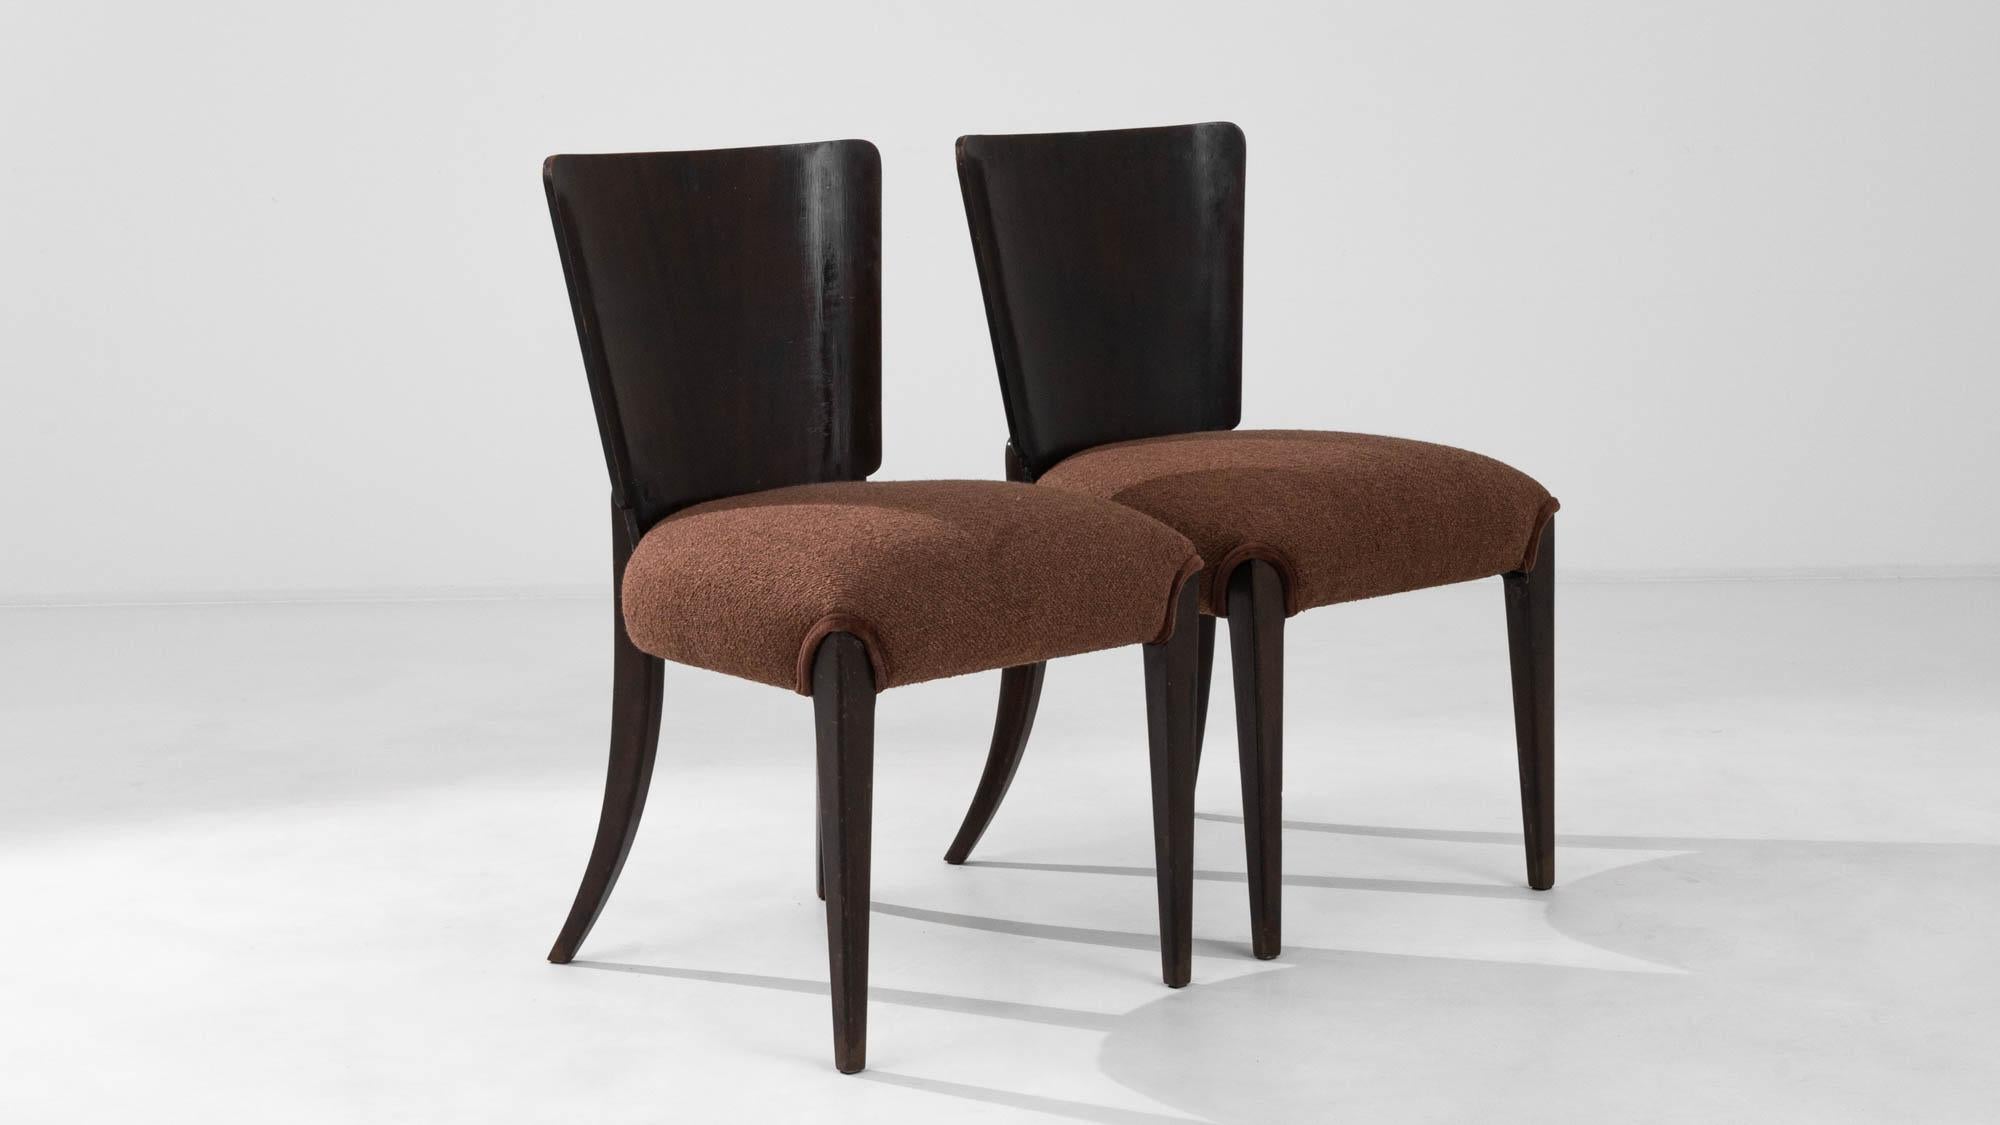 20th Century Czechia Upholstered Chairs By J. Halabala, a Pair For Sale 4